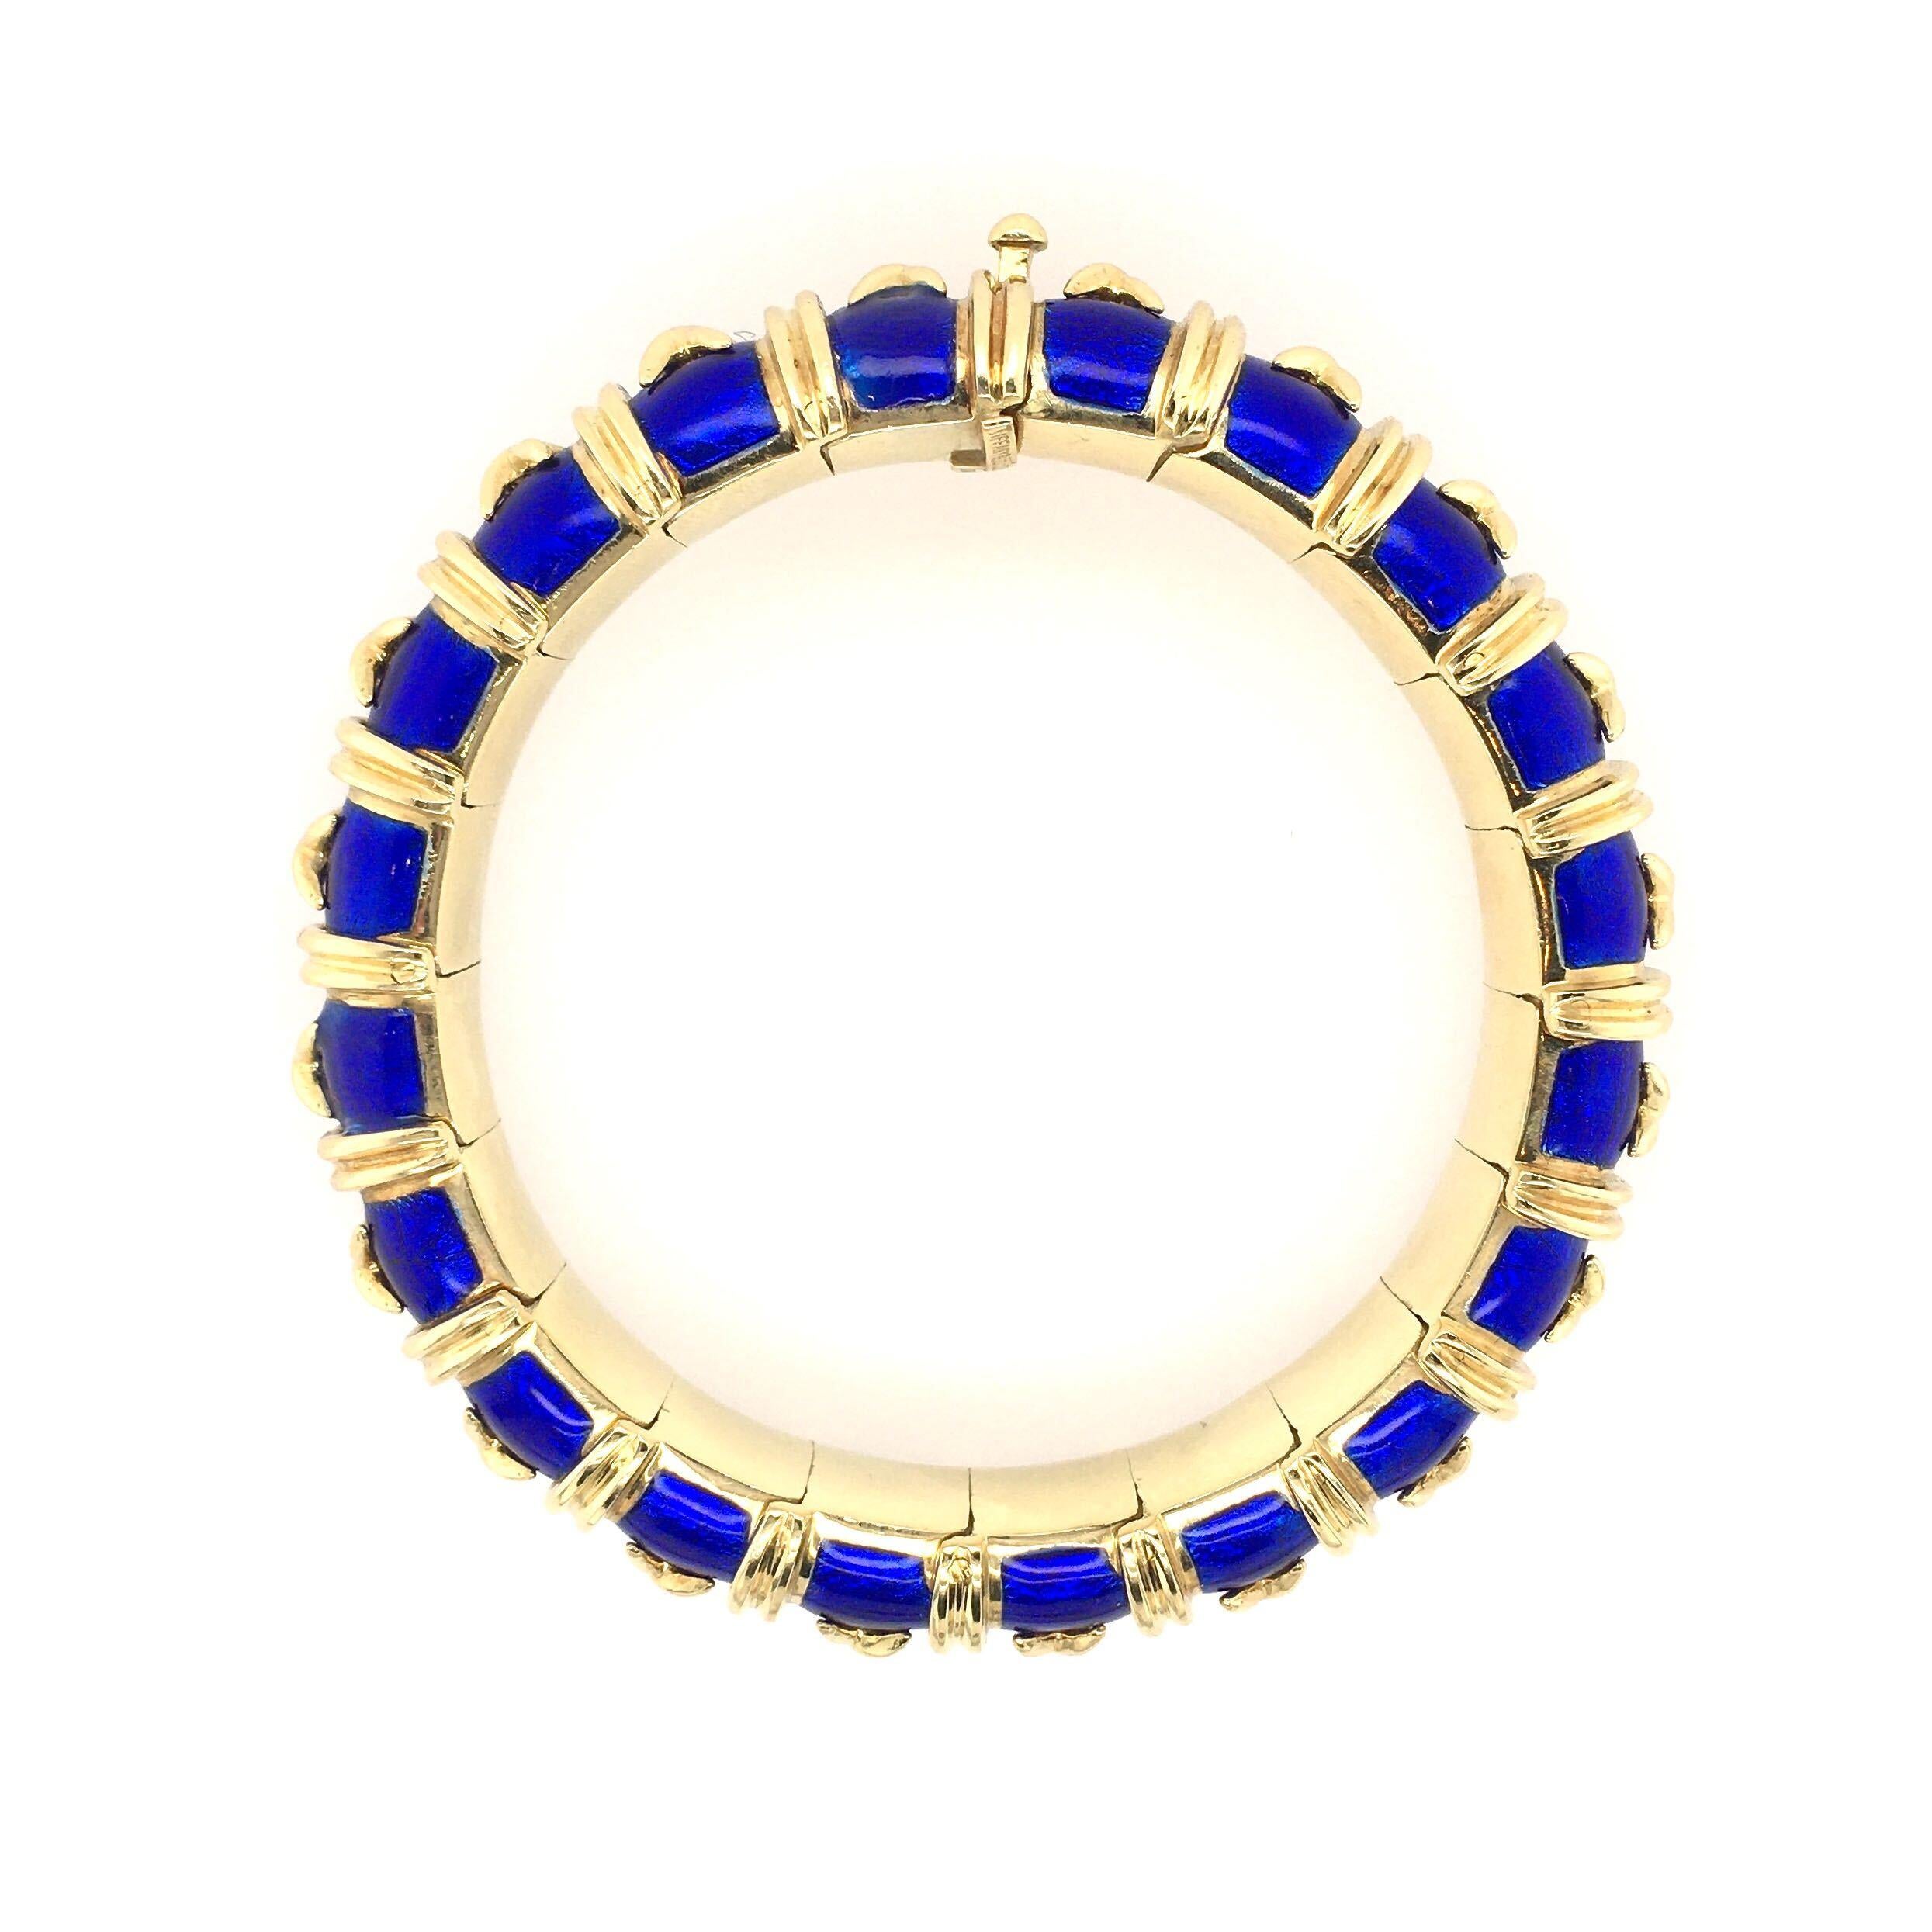 An 18 karat yellow gold and blue enamel Croisillon bracelet.  Signed Tiffany & Co Schlumberger.  Made in France. The royal blue paillonné enamel articulated bangle with applied cross-shaped gold details and reeded band spacers, inner circumference